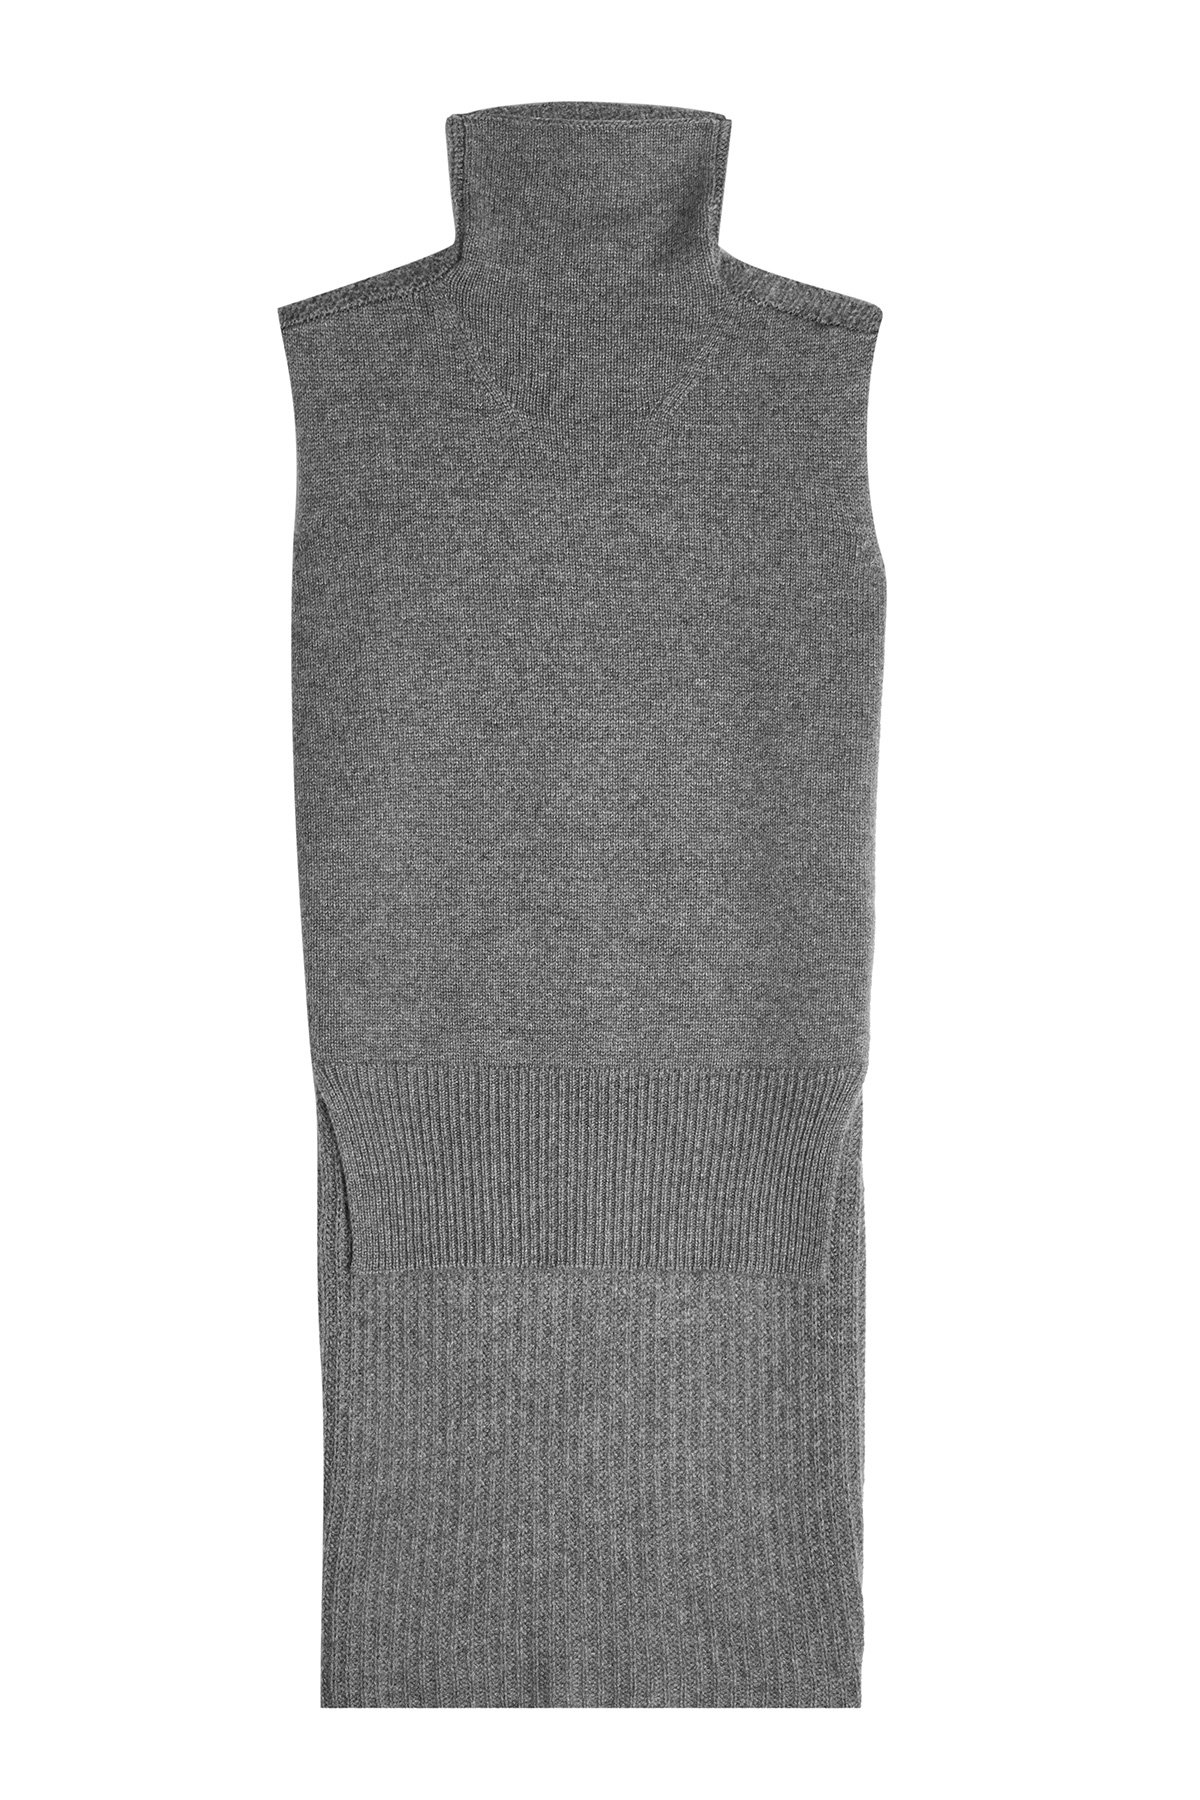 WILLIAM FAN - Cashmere Top with Turtleneck and High-Low Hem